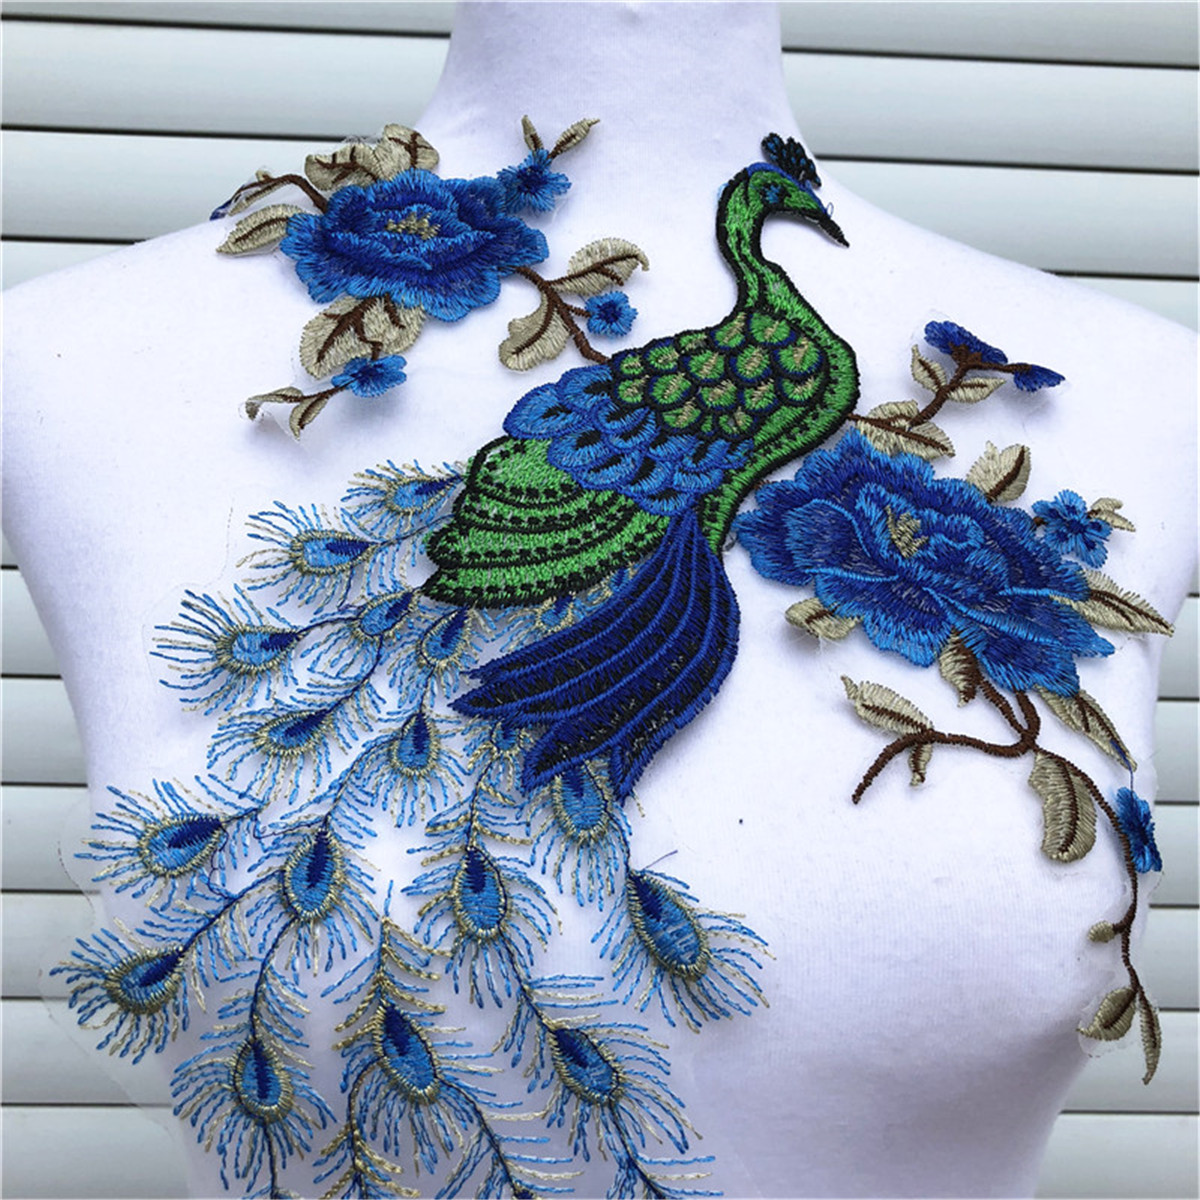 The pros and cons of buying cross stitch and hand embroidery kits - Peacock  & Fig